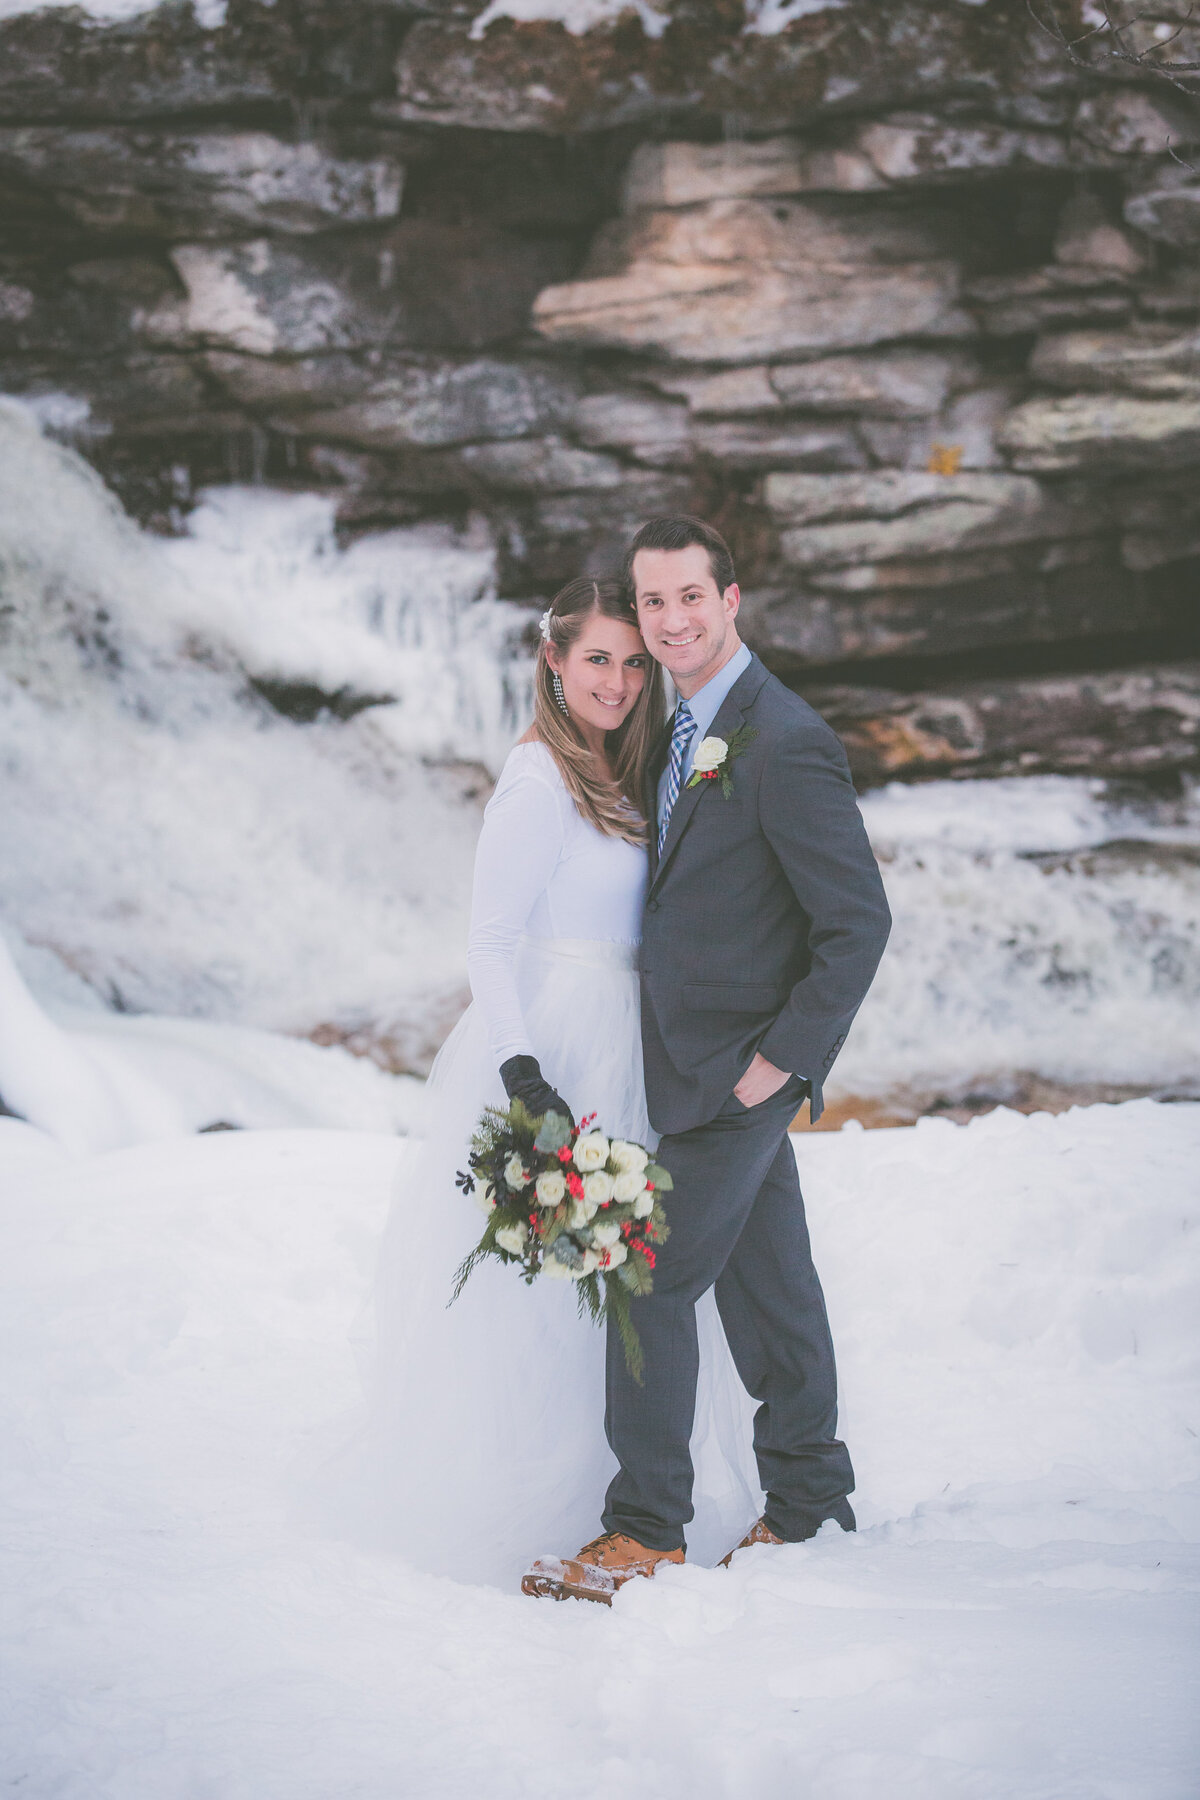 Groom puts hand in pocket and poses with wife during winter adventure elopement.